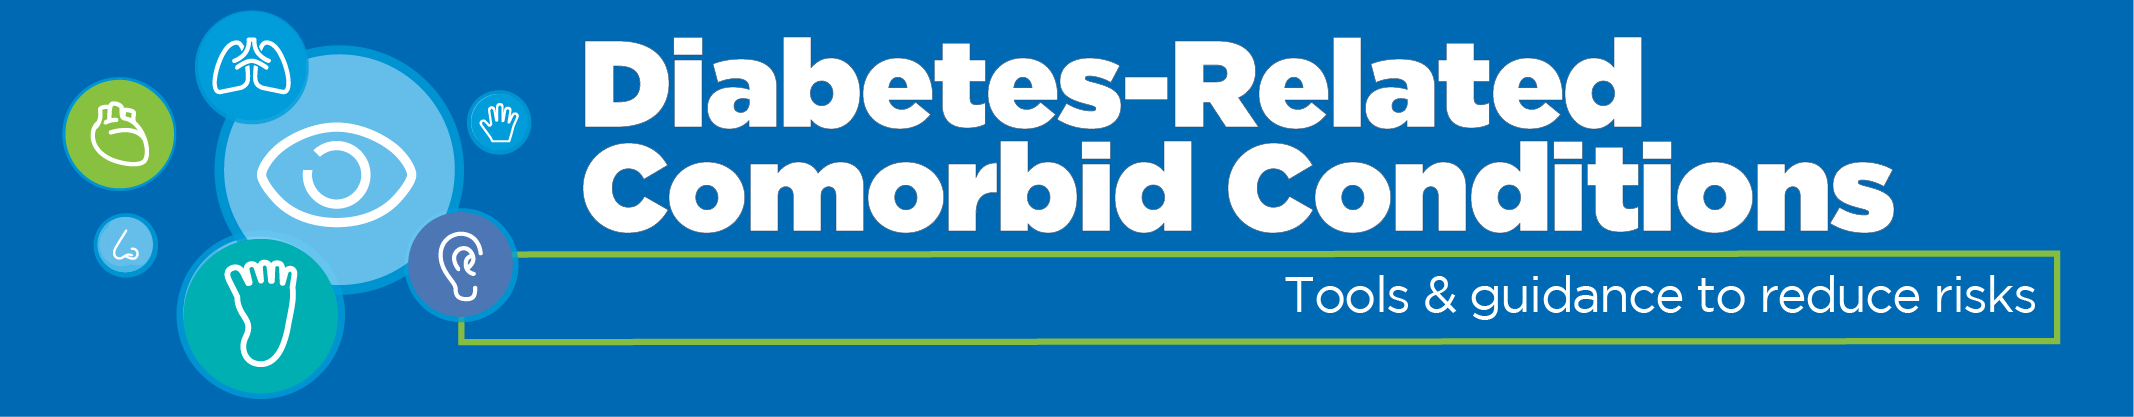 Diabetes and Comorbidities Guidance for Providers